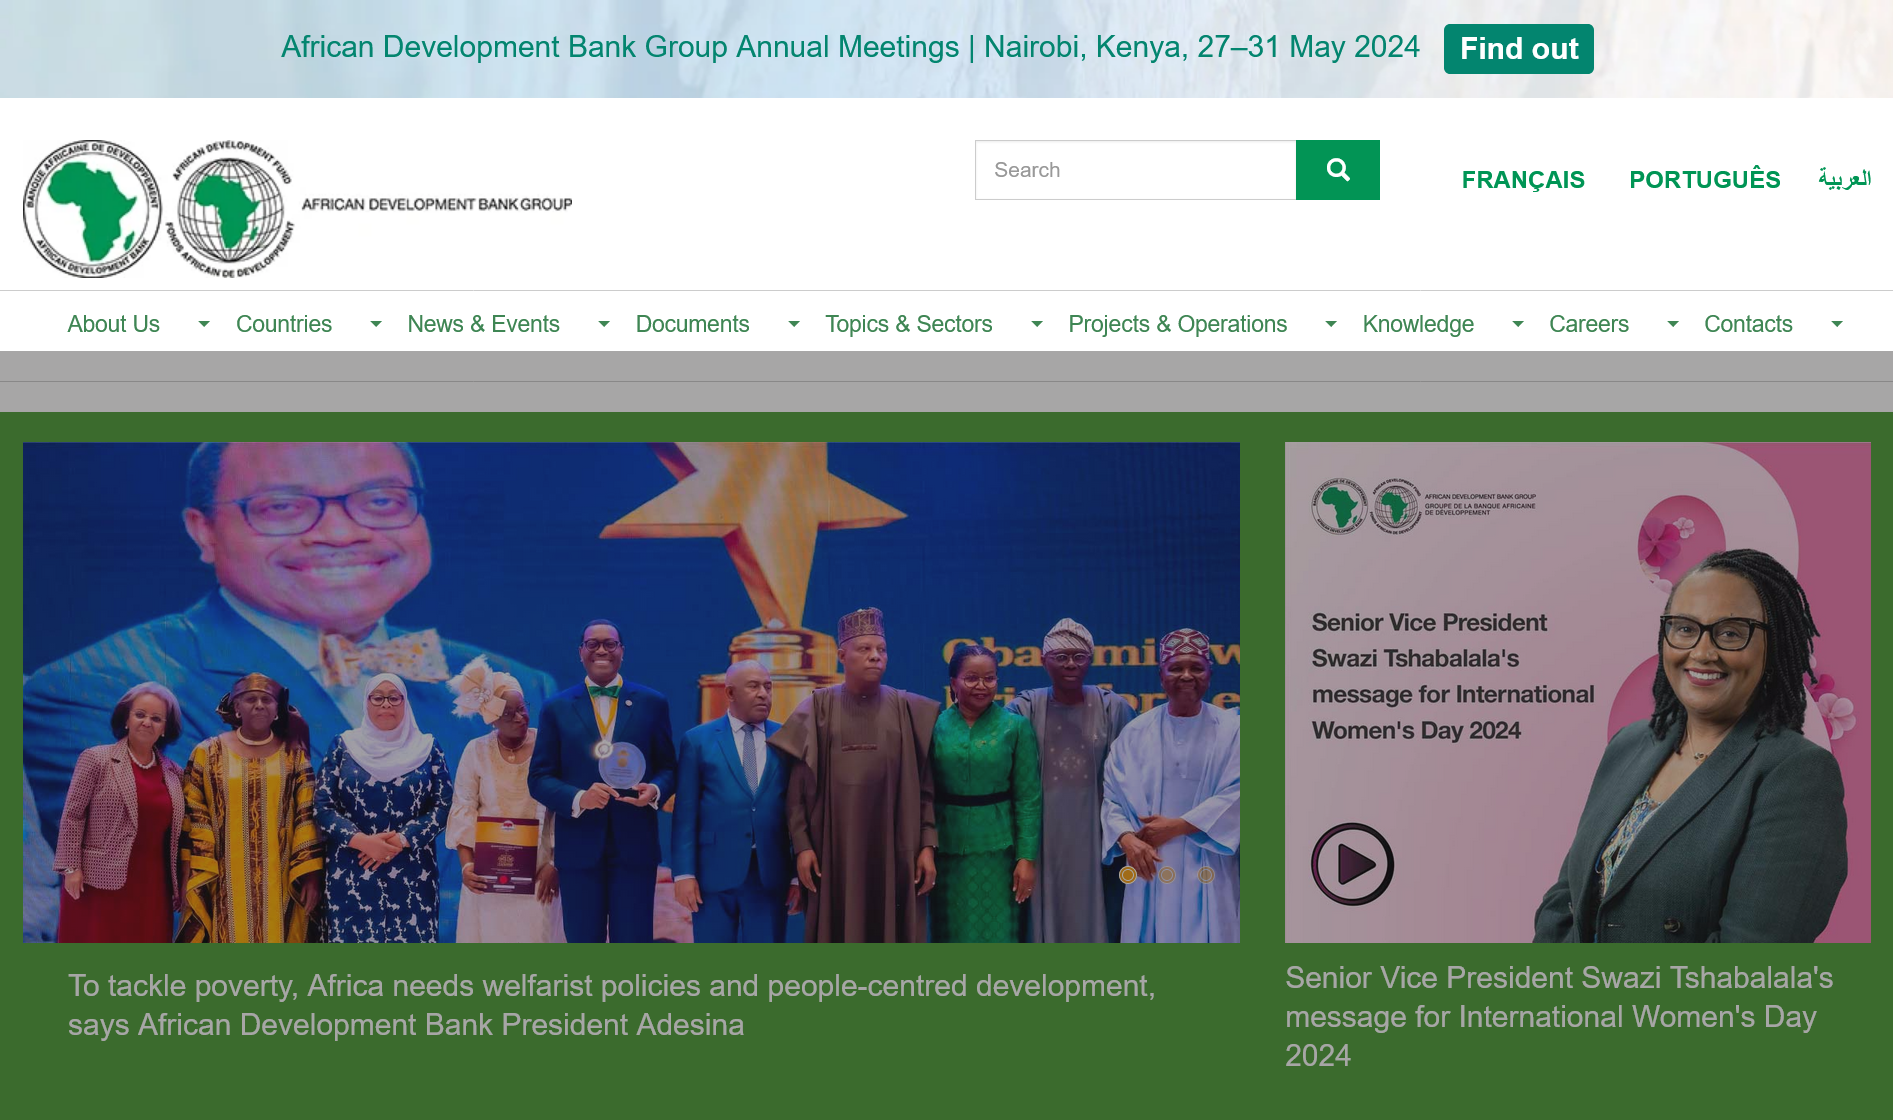 African Development Bank Group Young Professionals Program (YPP)